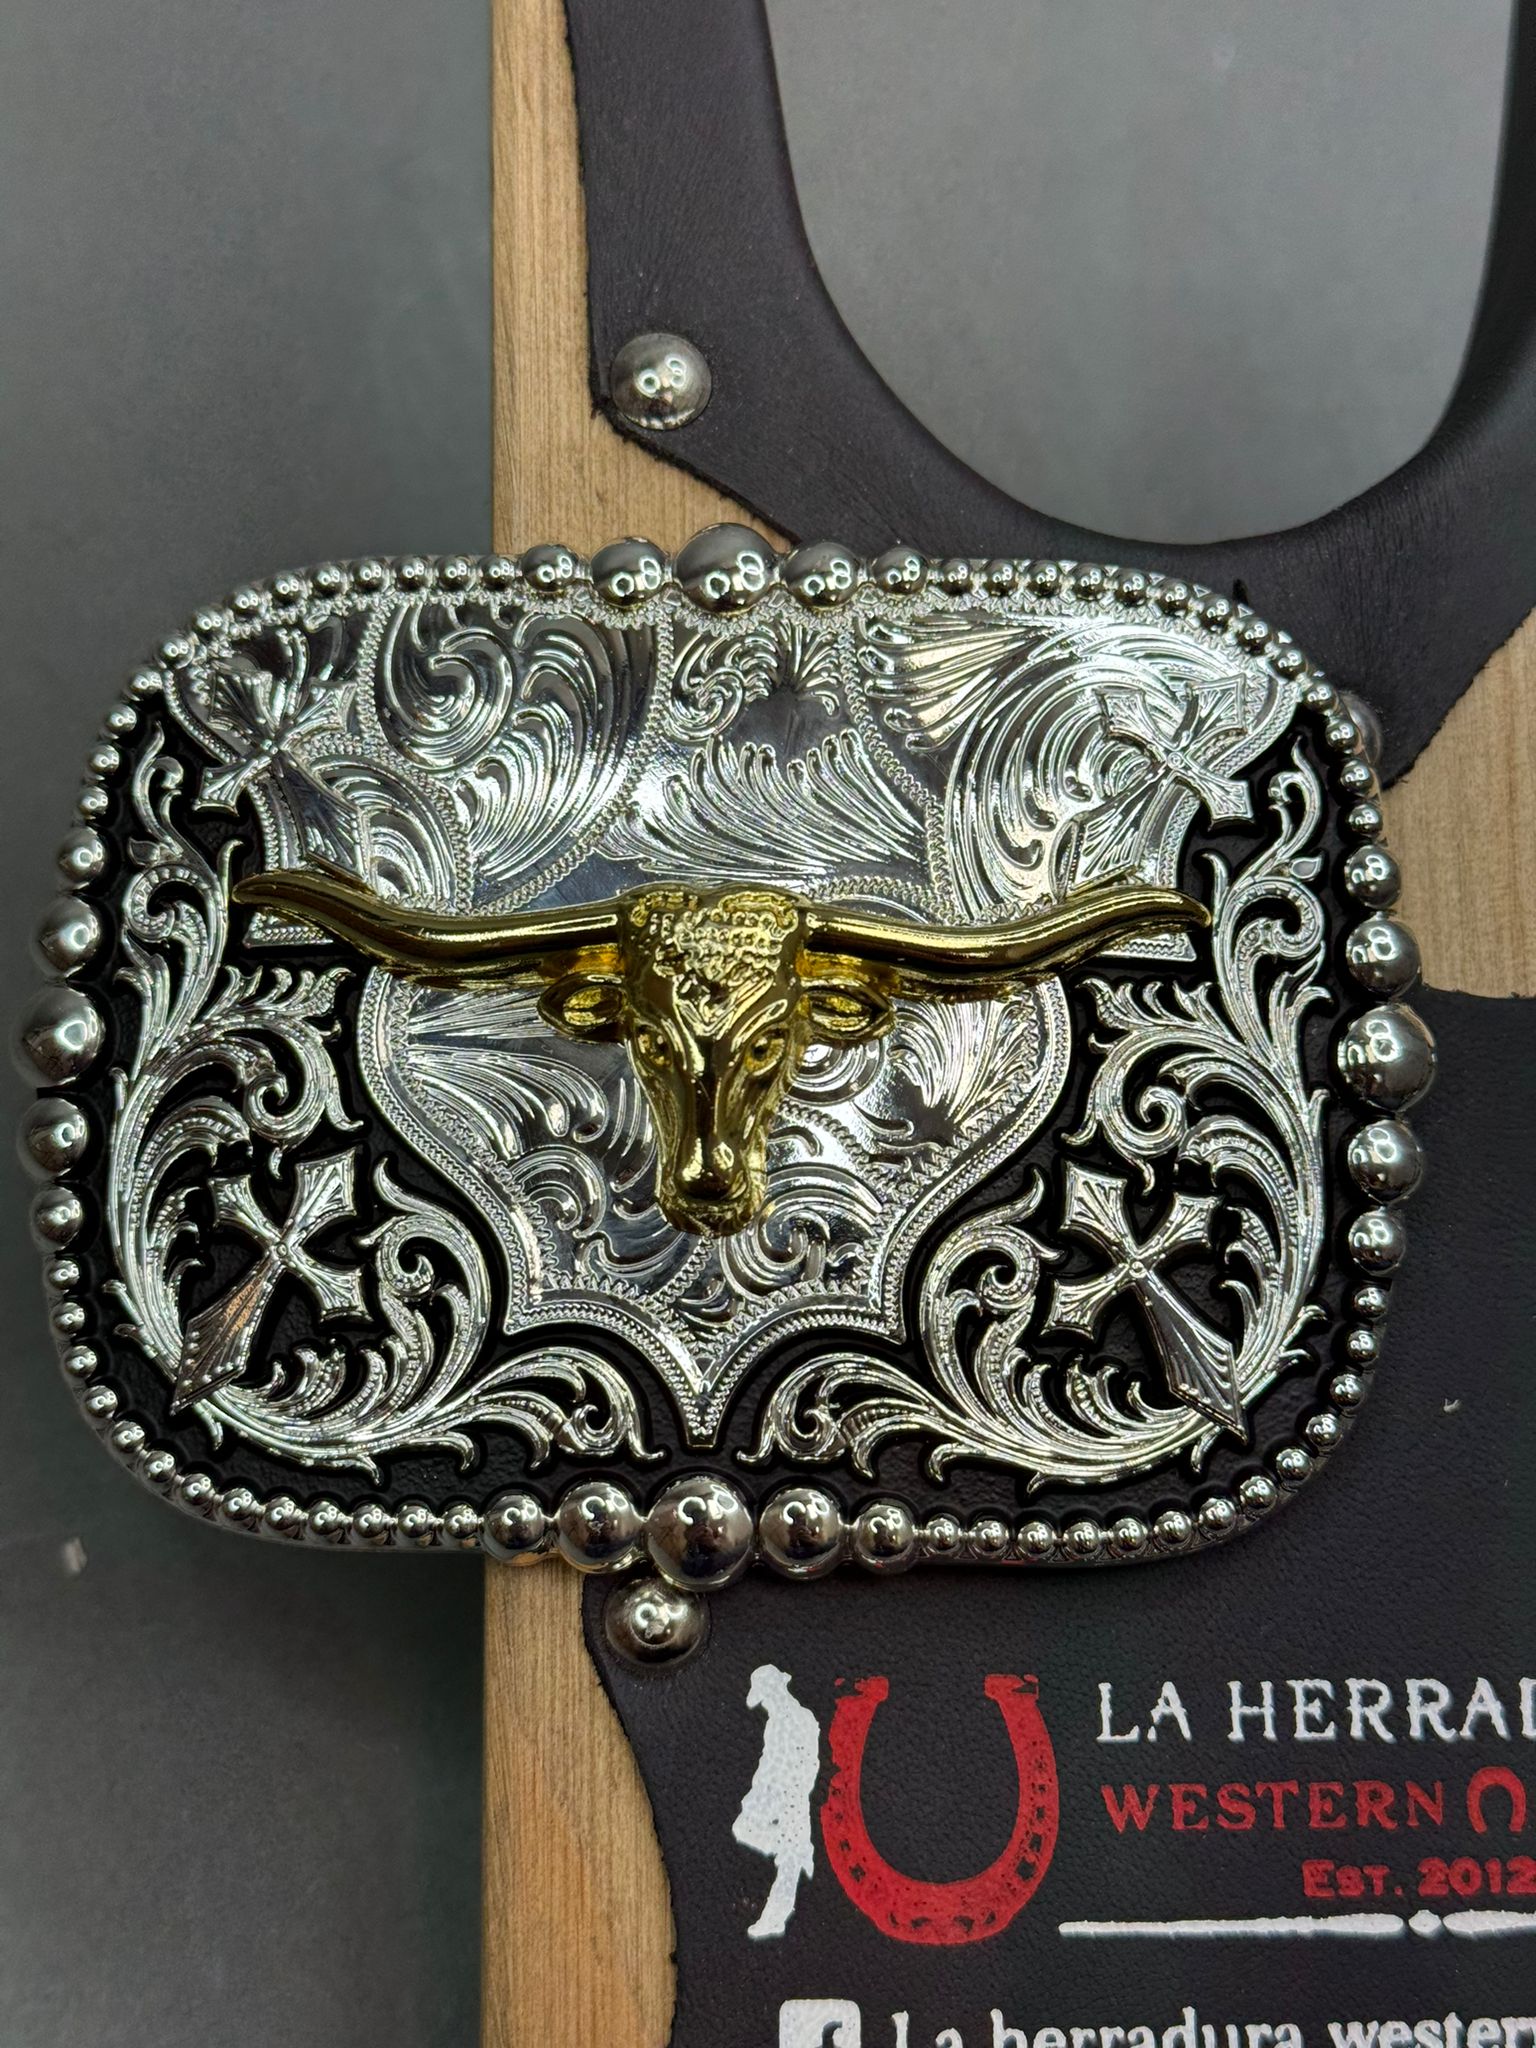 ROUNDED SQUARE SILVER BLACK WITH GOLD BULL BUCKLE